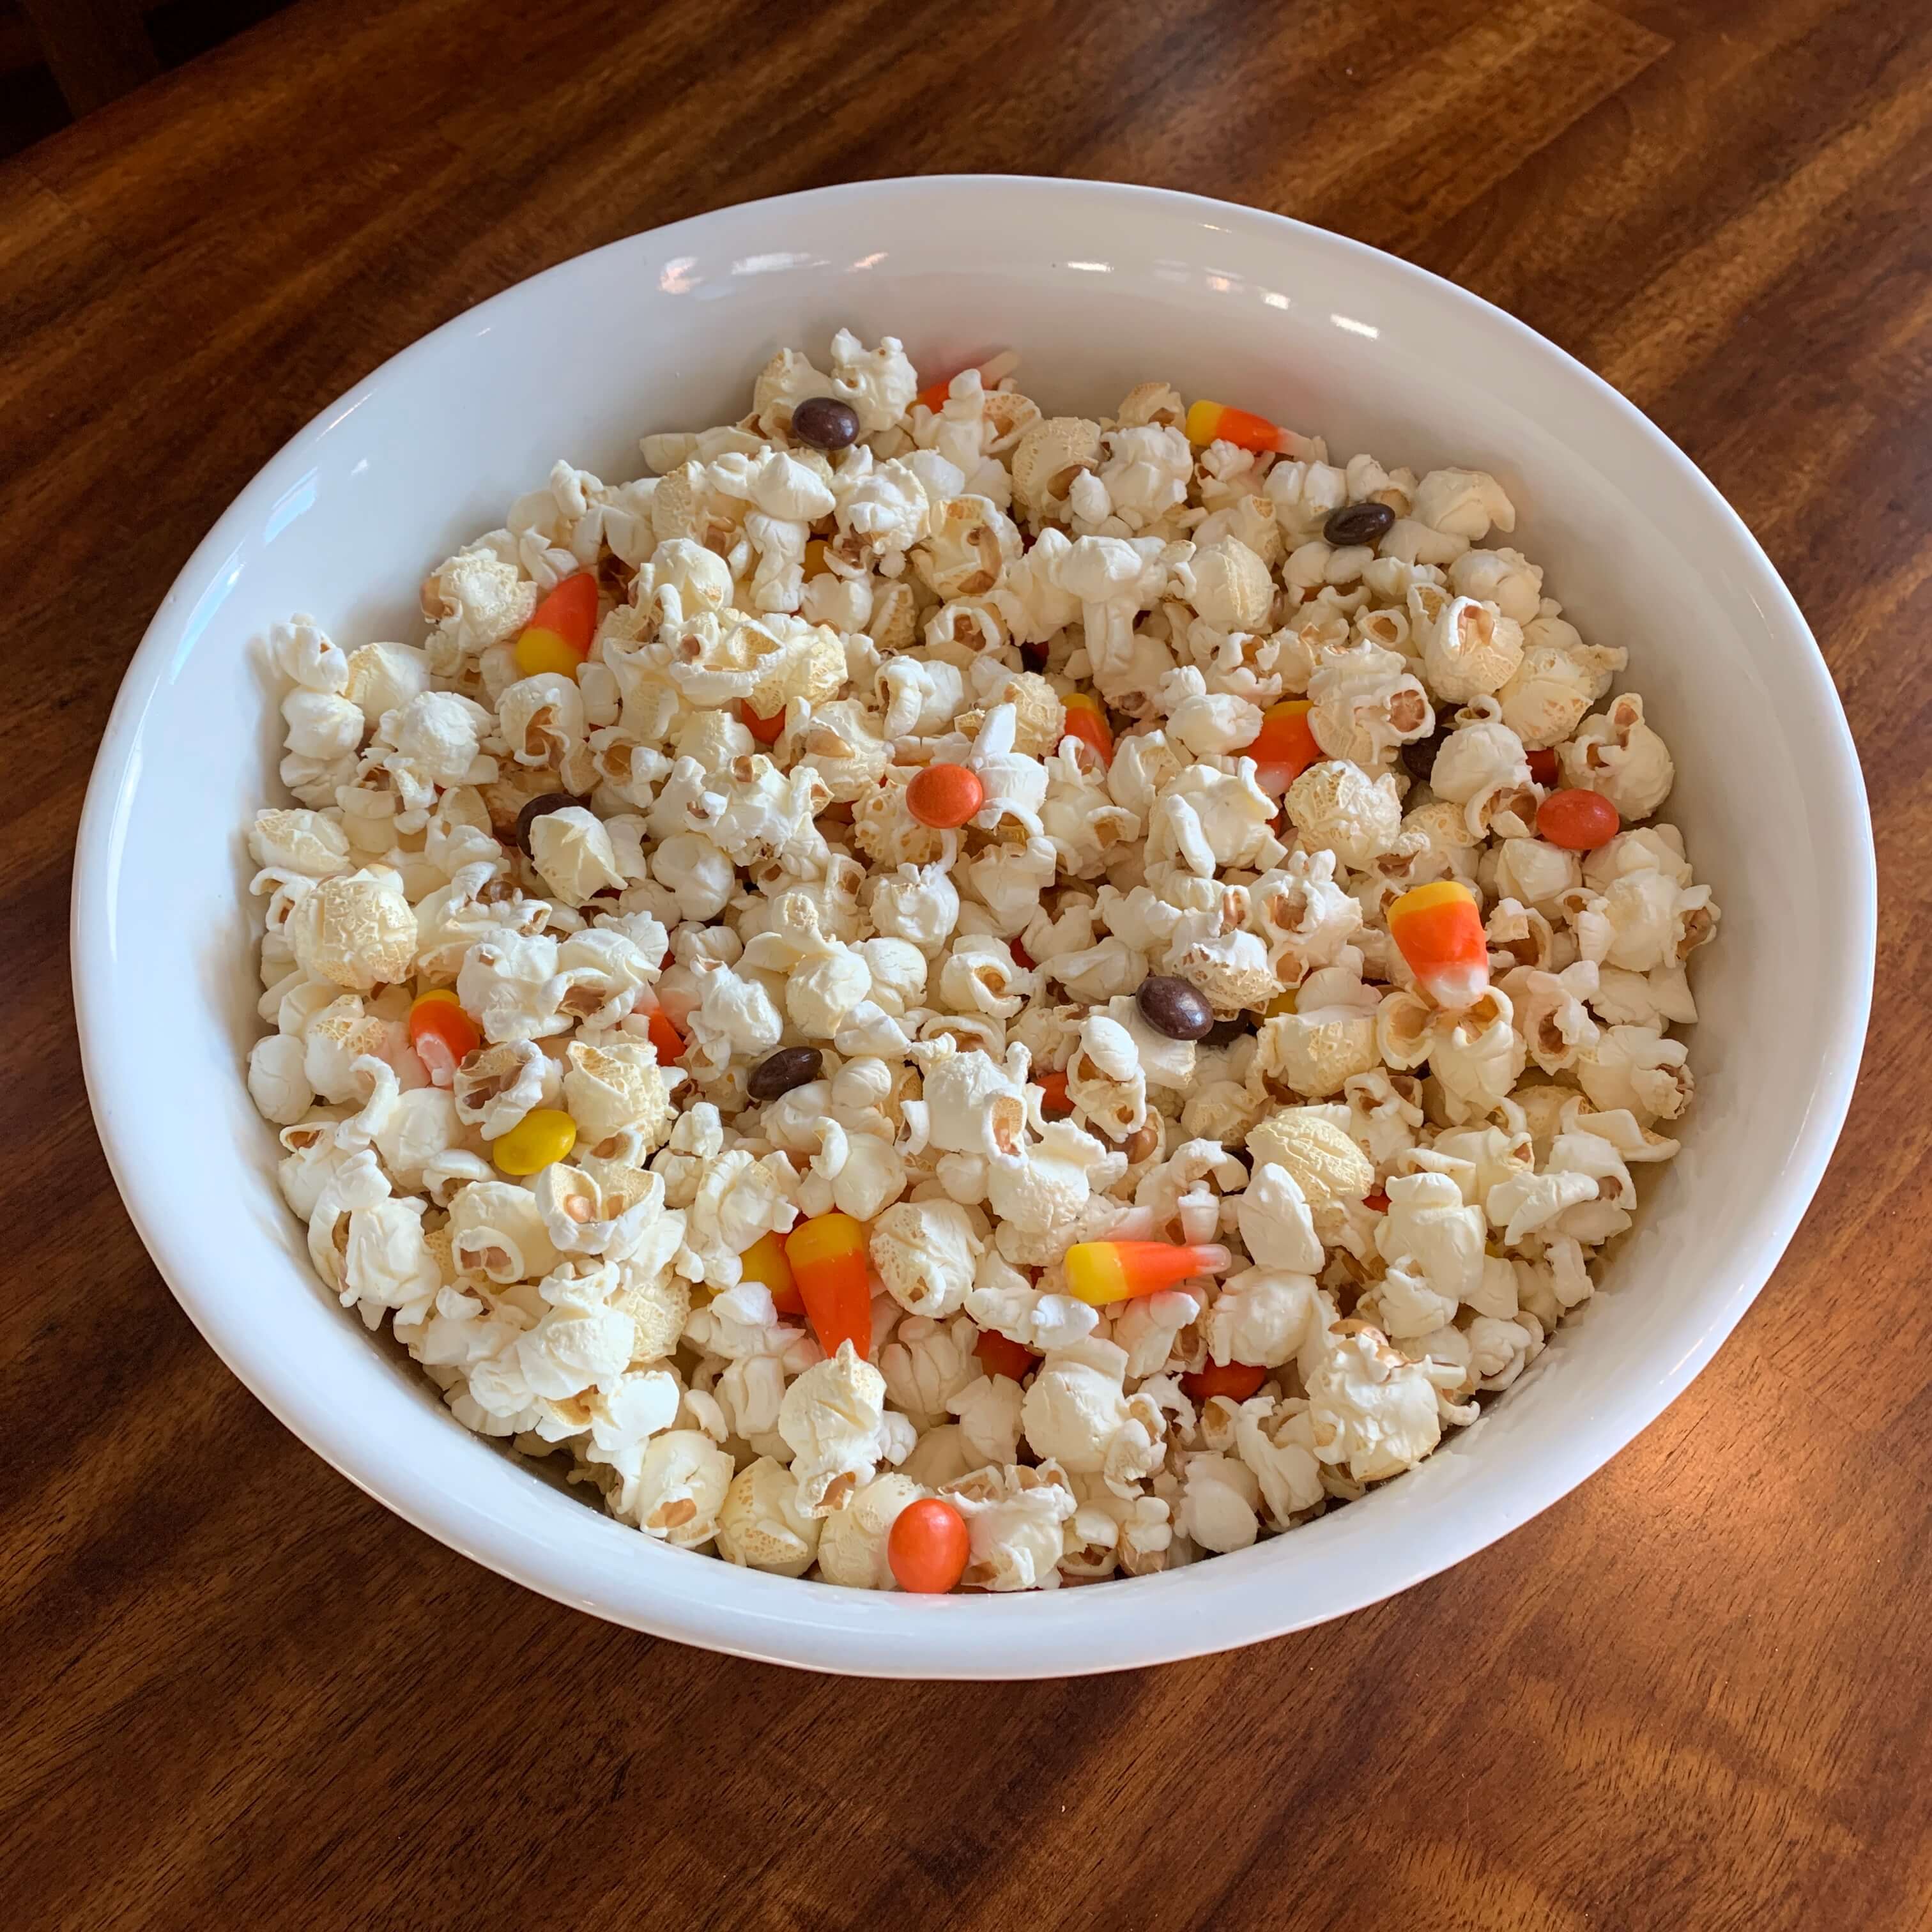 popcorn mixed with candy corn and orange, brown, and yellow candy pieces filled with peanut butter